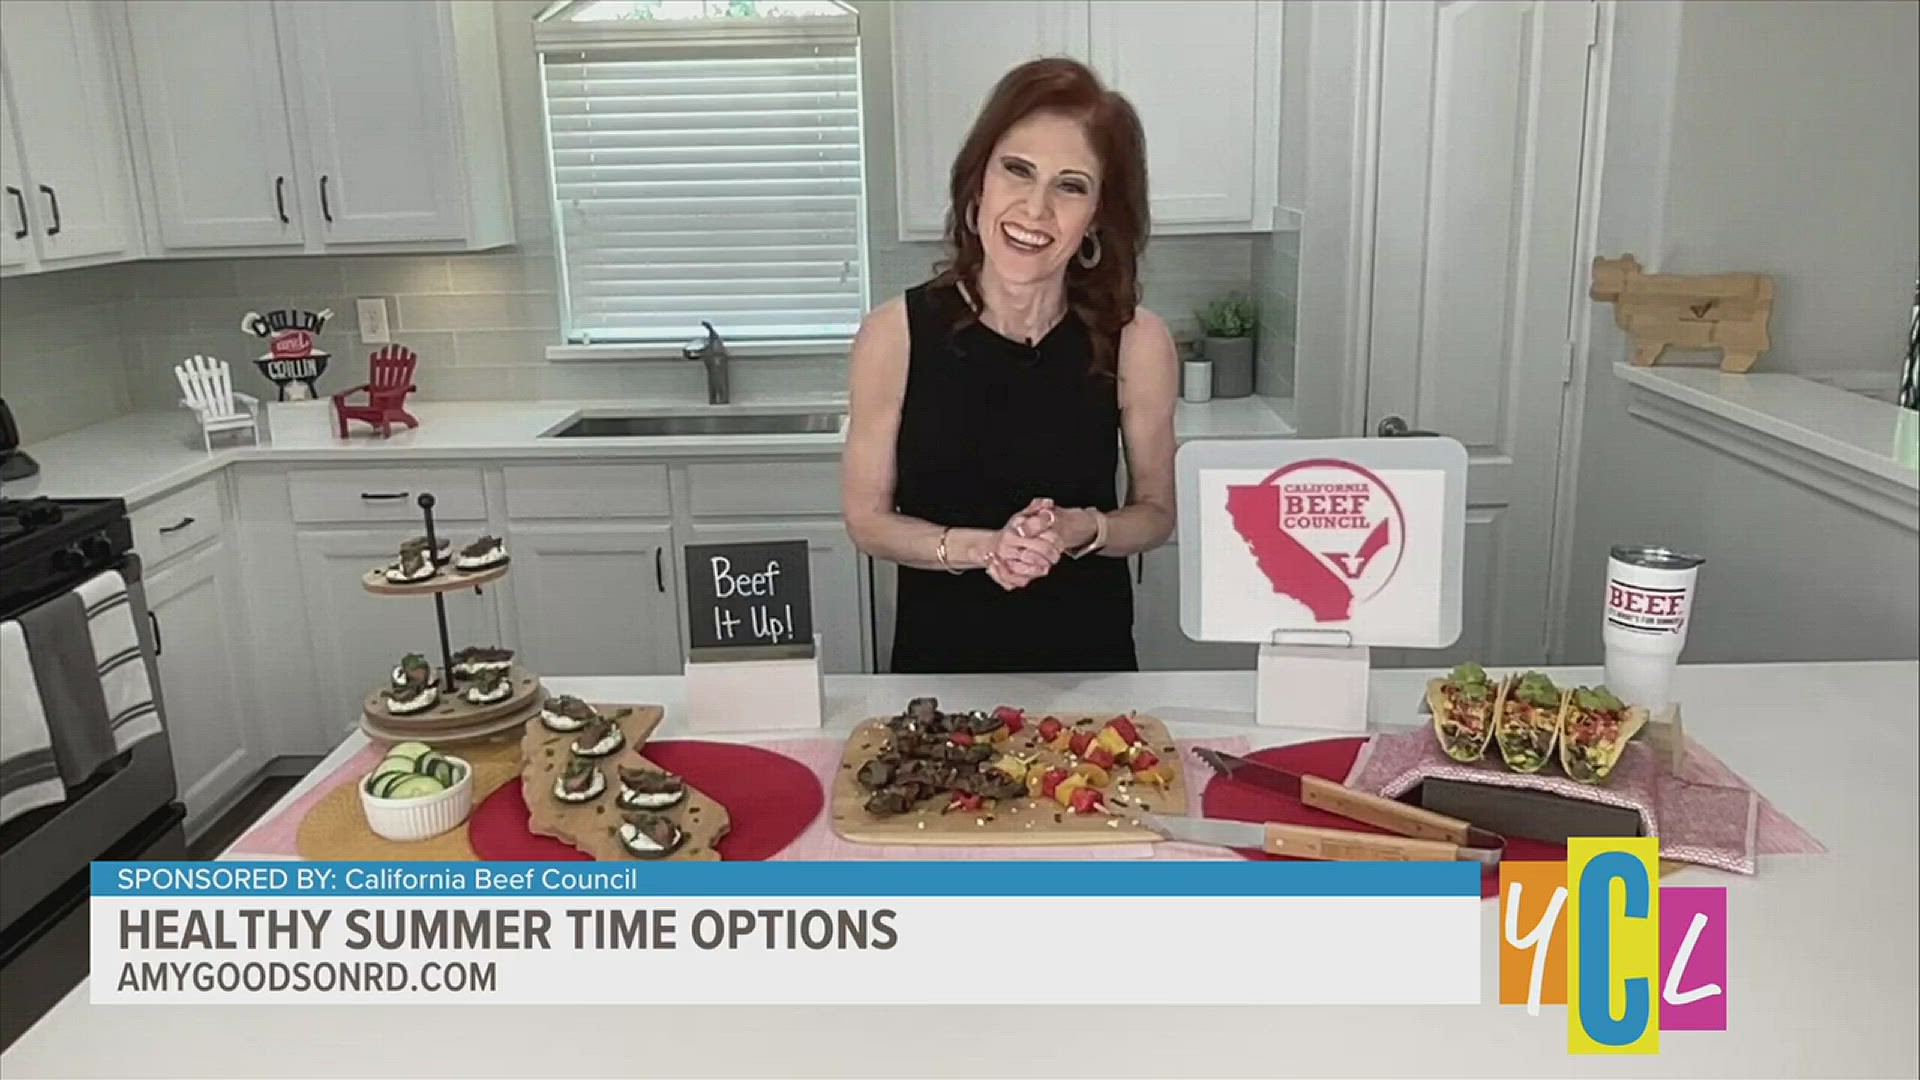 Let's beef up our summer snacks with bites that are delicious, nutritious, and heart healthy! This segment paid for by the California Beef Council.